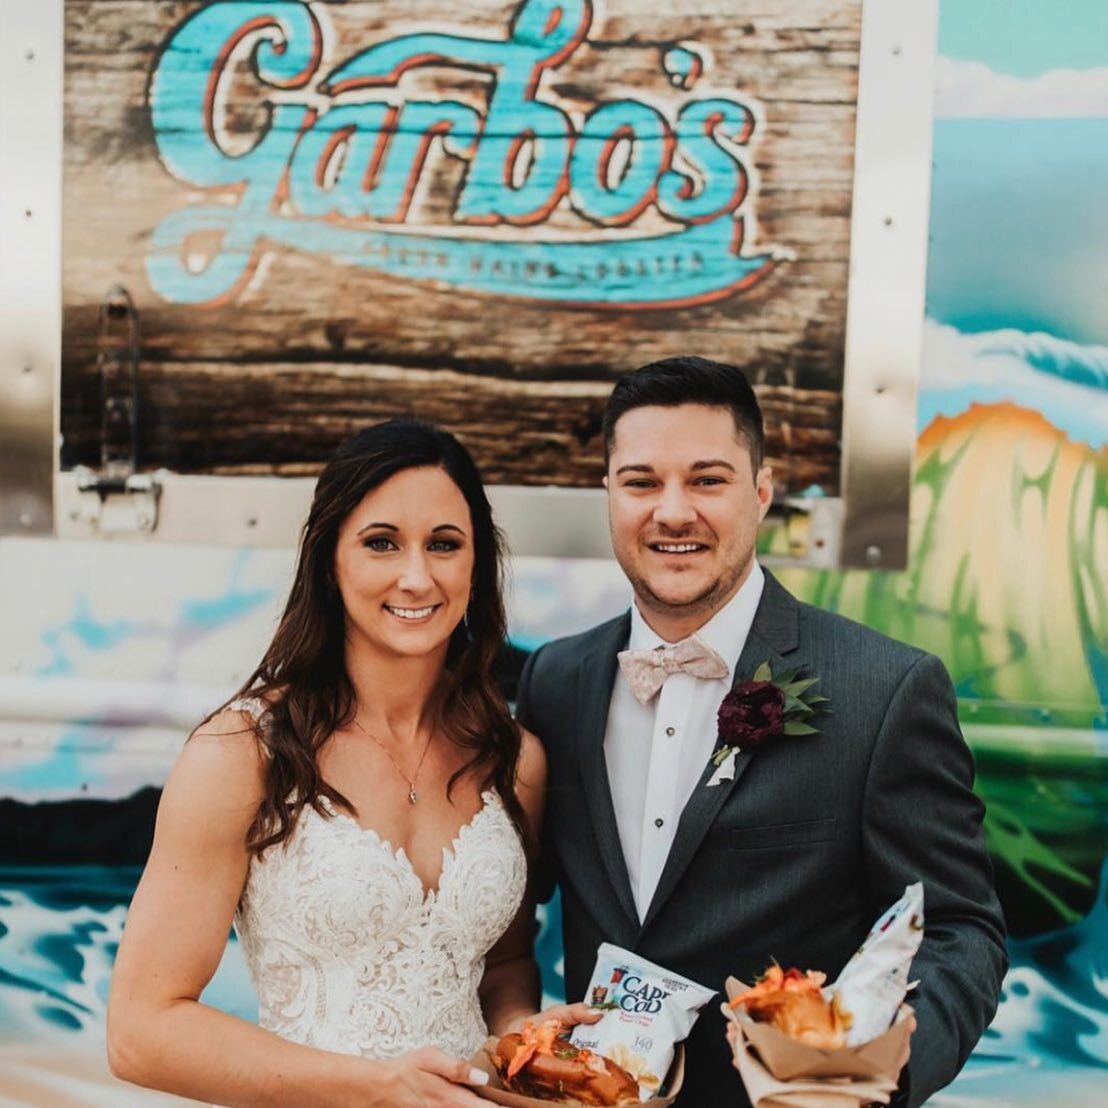 Hey all you lobster-loving lovebirds...💞✨🦞

We're already booking dates for 2022, book us for your upcoming nuptials! 

Book or learn more with our link in bio!
-
-
-
#atxcatering #weddingseason #lobsterisforlovers #lobsterlovers #weddingcaterers #